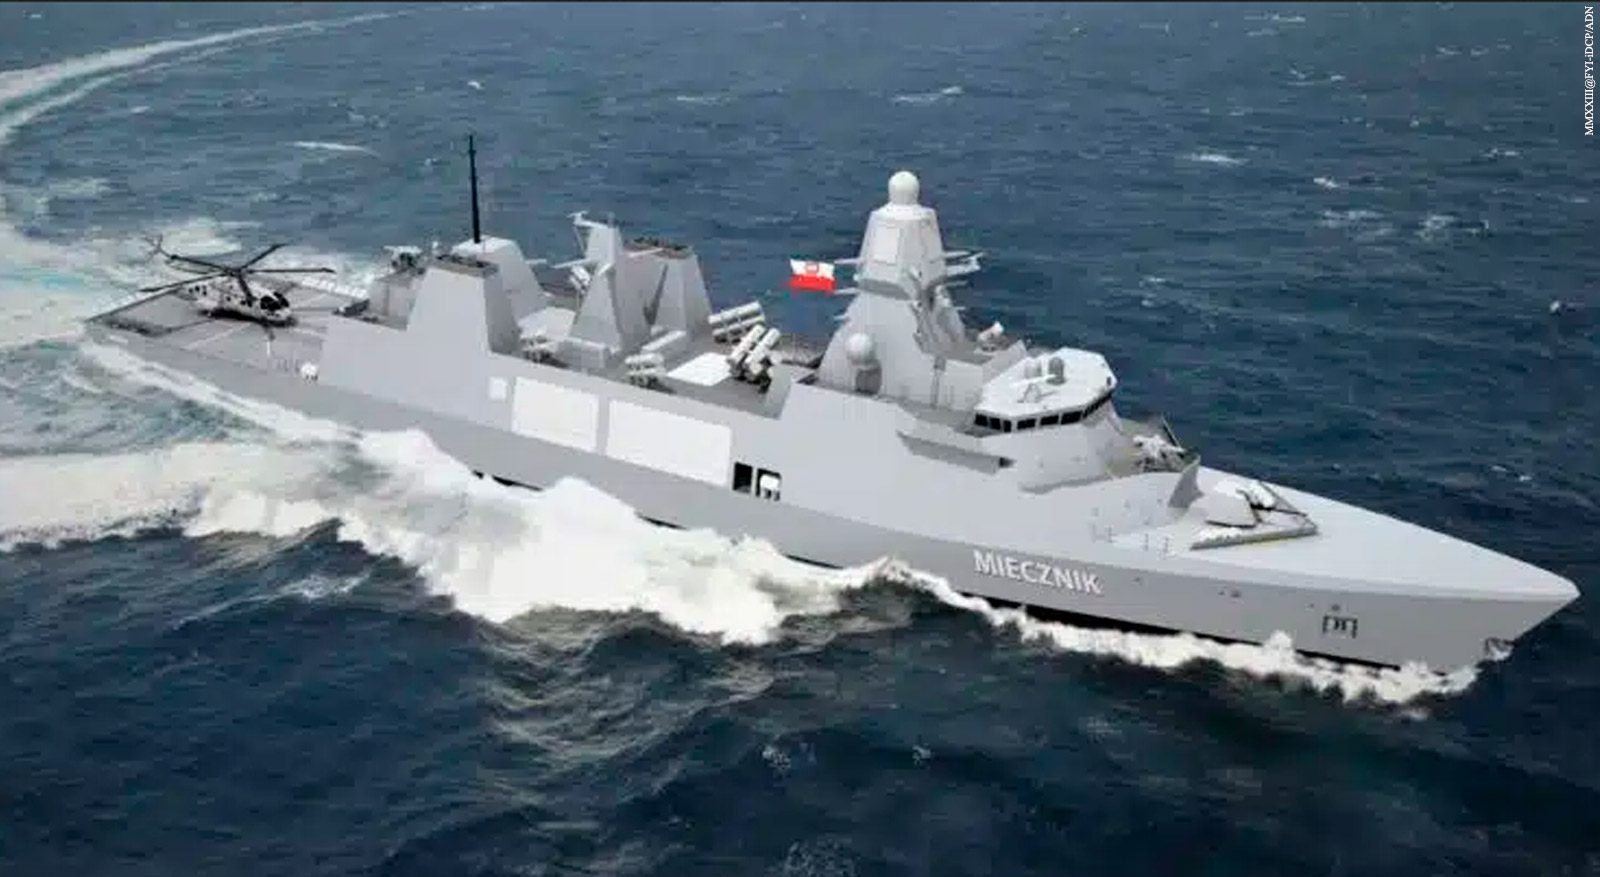 MBDA has received a contract from Poland to equip the Polish Navy's three new Miecznik-class frigates with MBDA's Sea Ceptor naval air defense system.